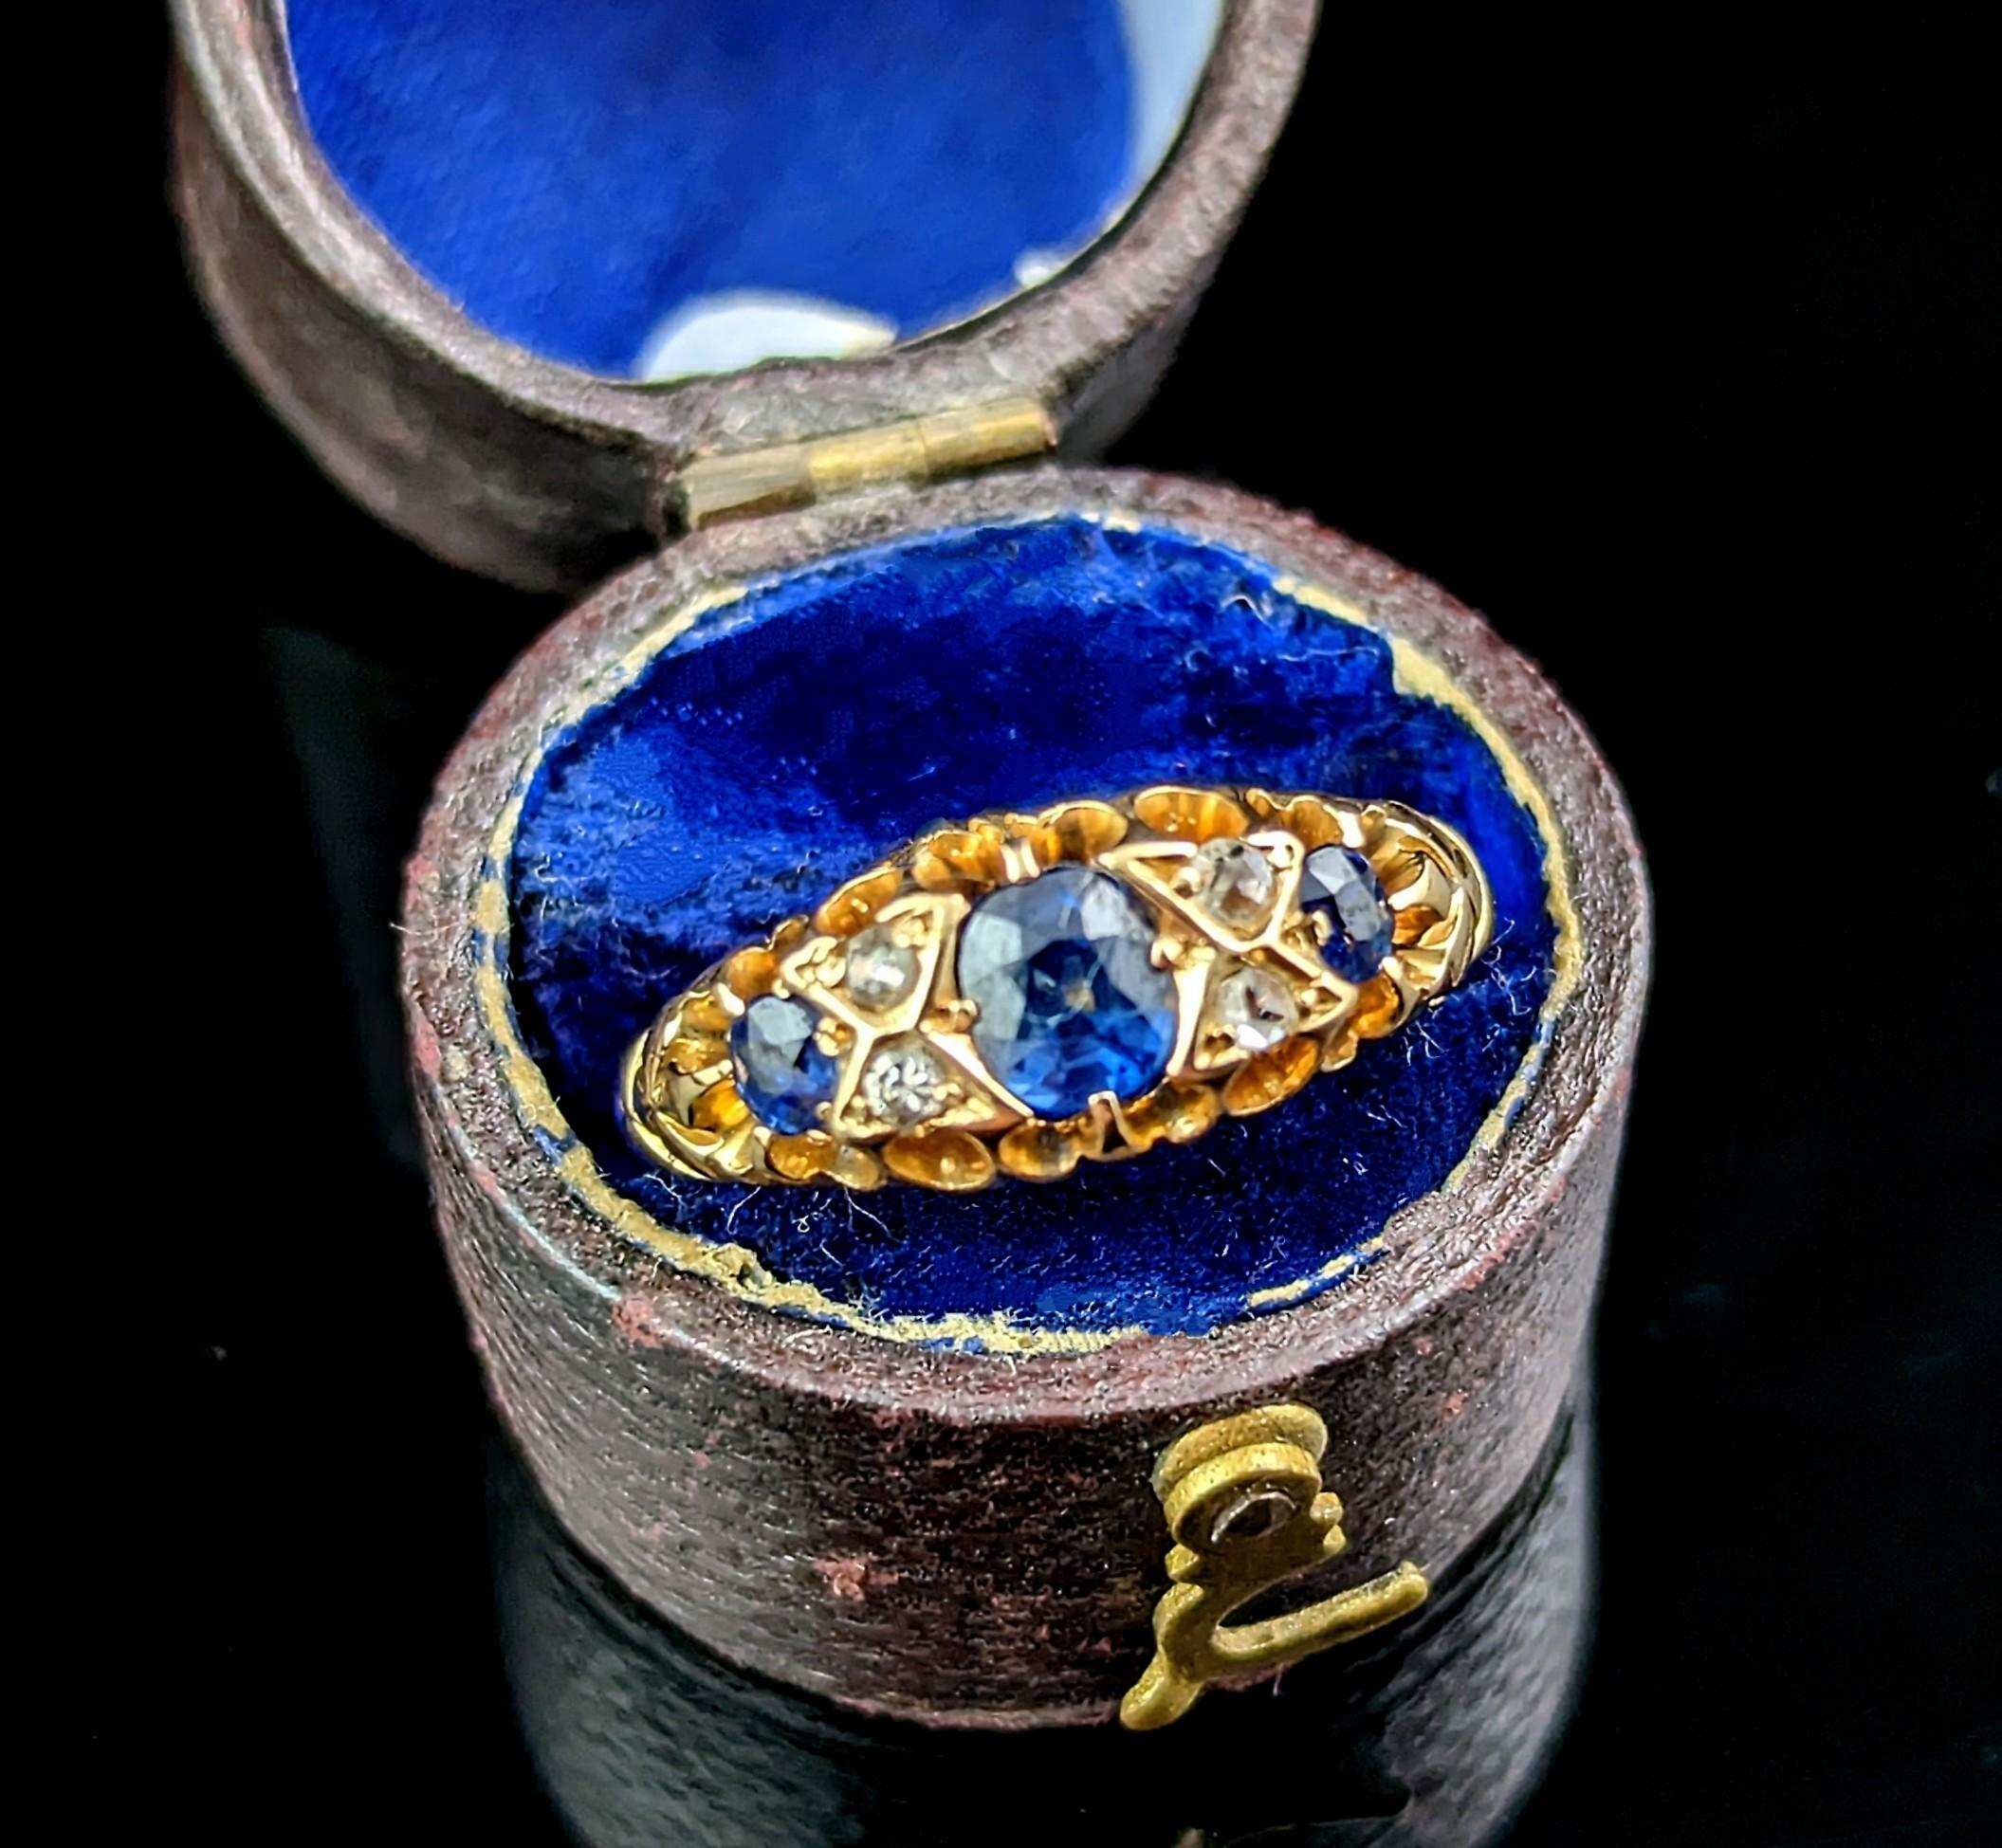 If you are looking for the perfect sapphire ring look no further! This stunning antique, Victorian era, Sapphire and Diamond ring is a simply a dream.

Crafted in rich 18ct yellow gold this ring has a central trio of sapphires with a vibrant rich